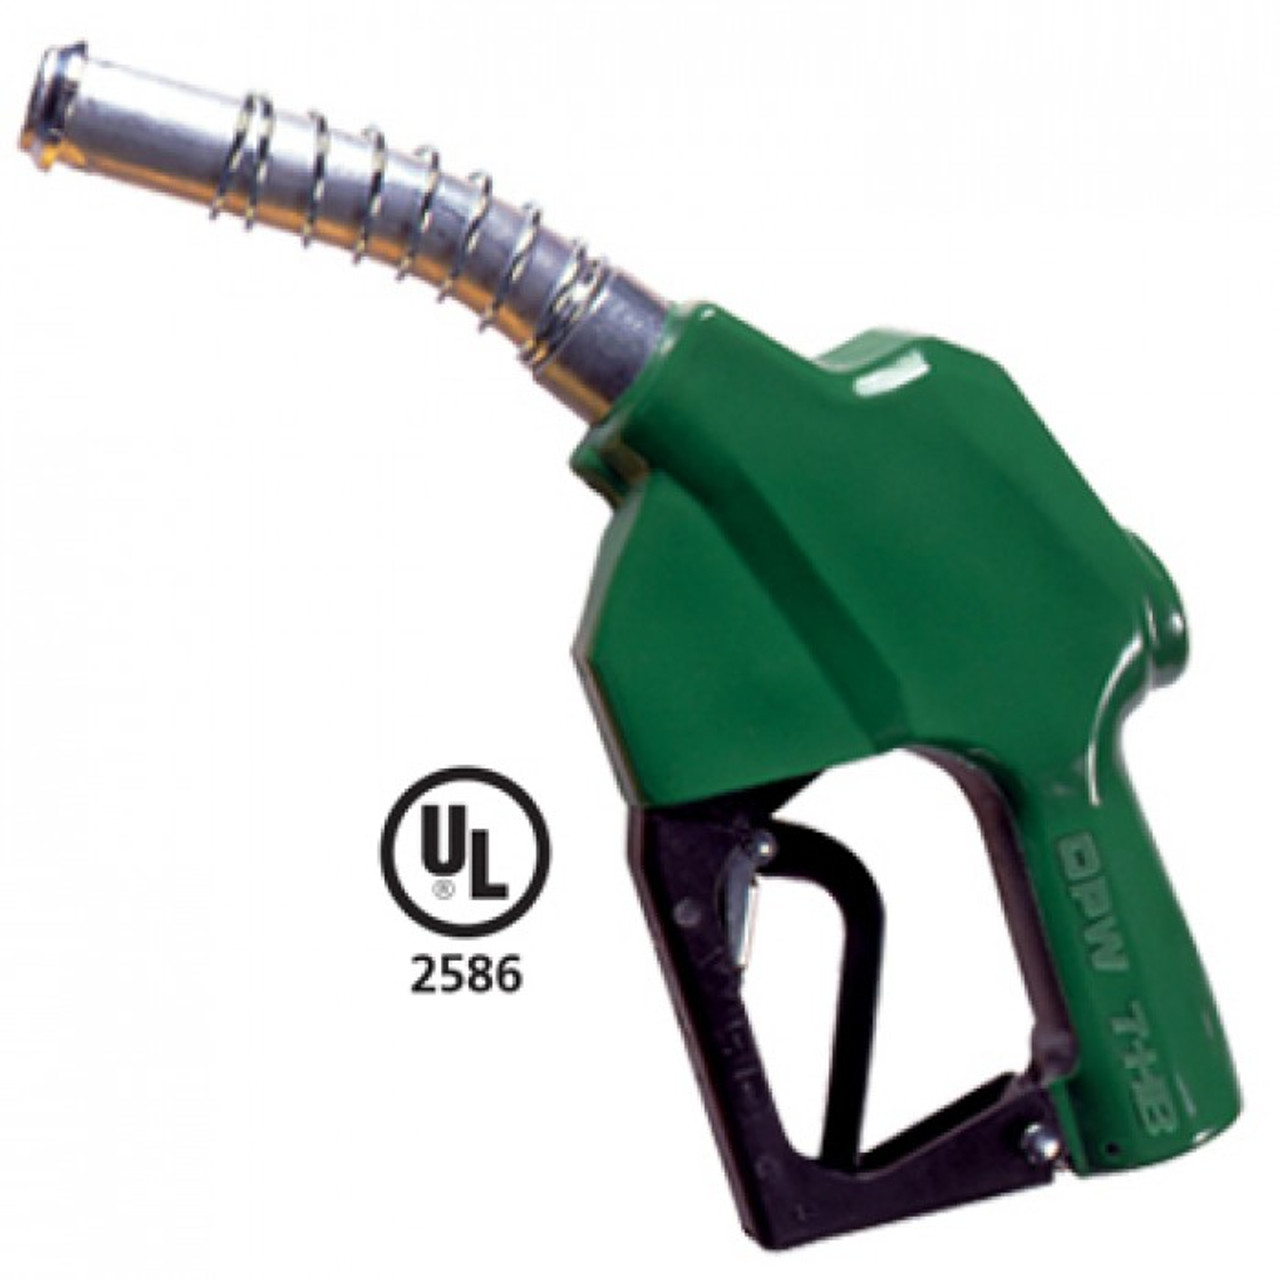 7HB-0100  - diesel nozzle green boot with spout ring